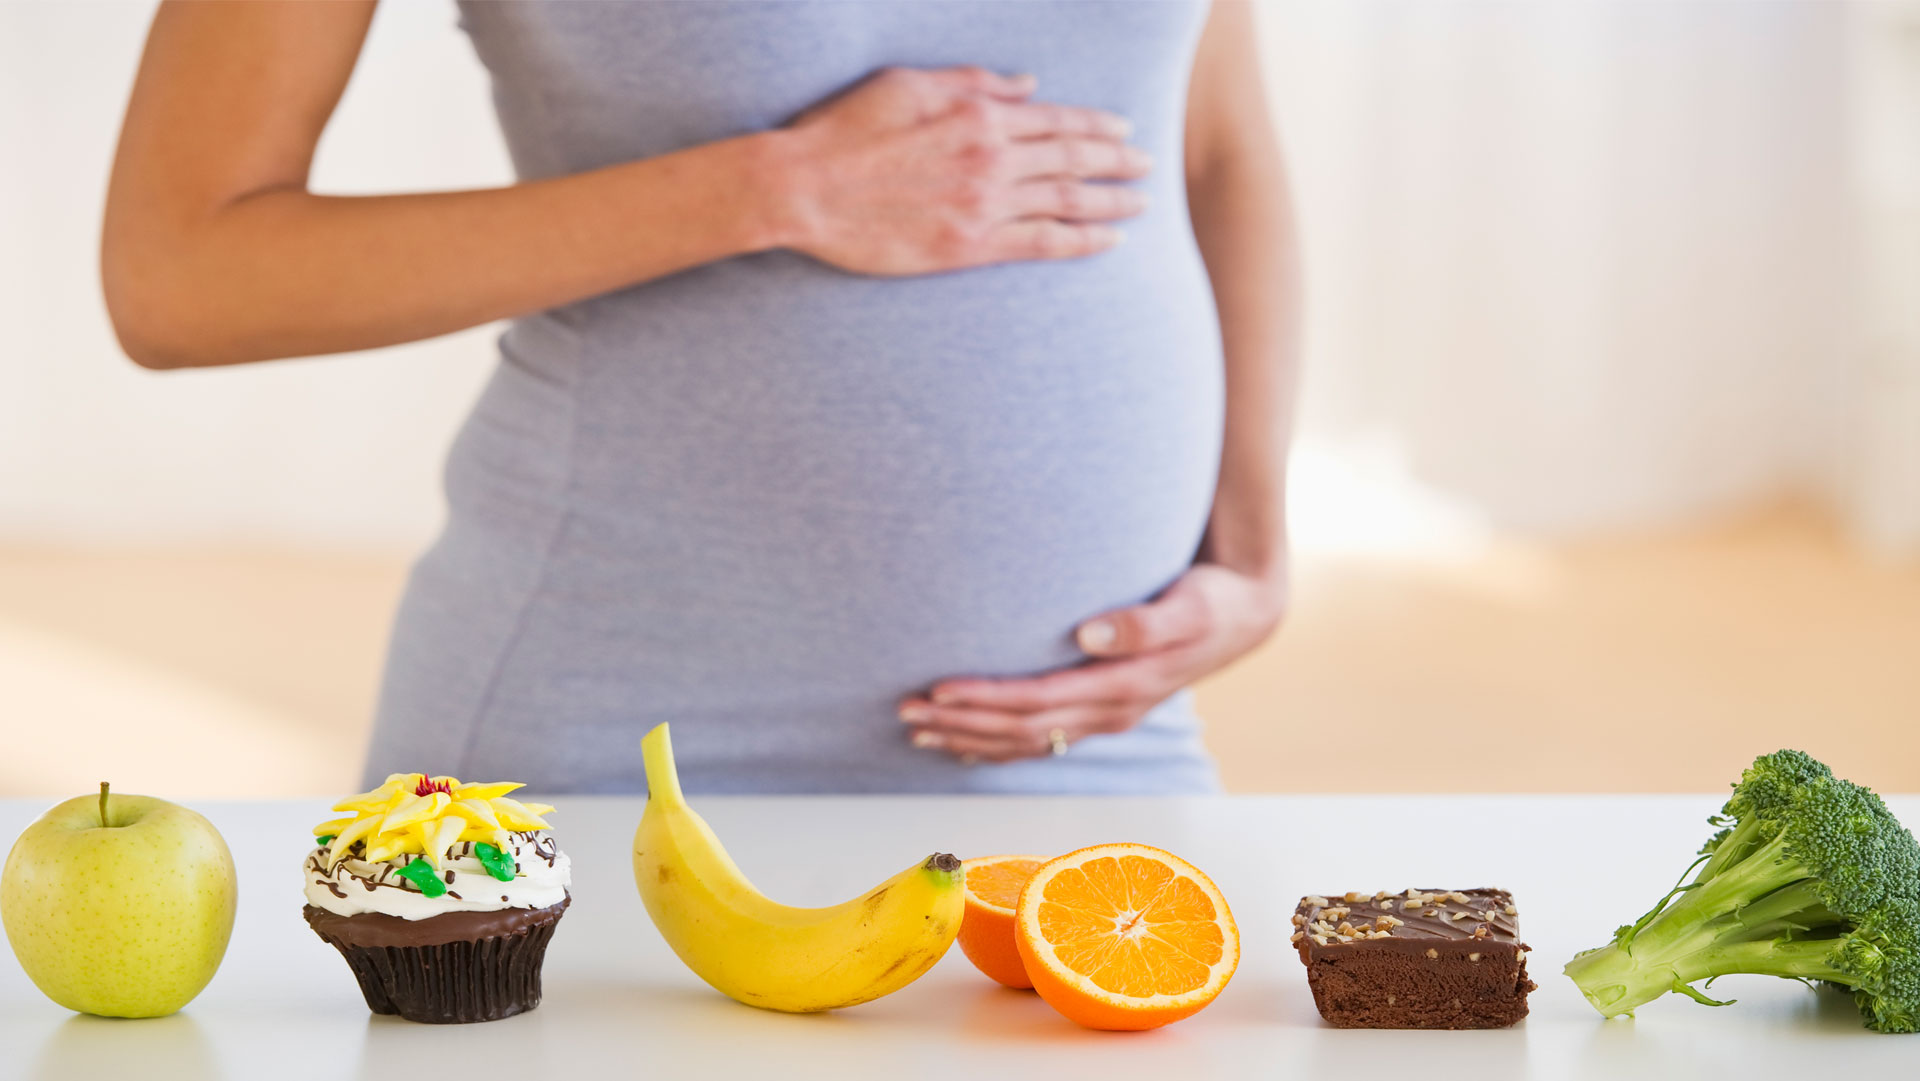 Here’s what you need to know about pregnancy nutrition